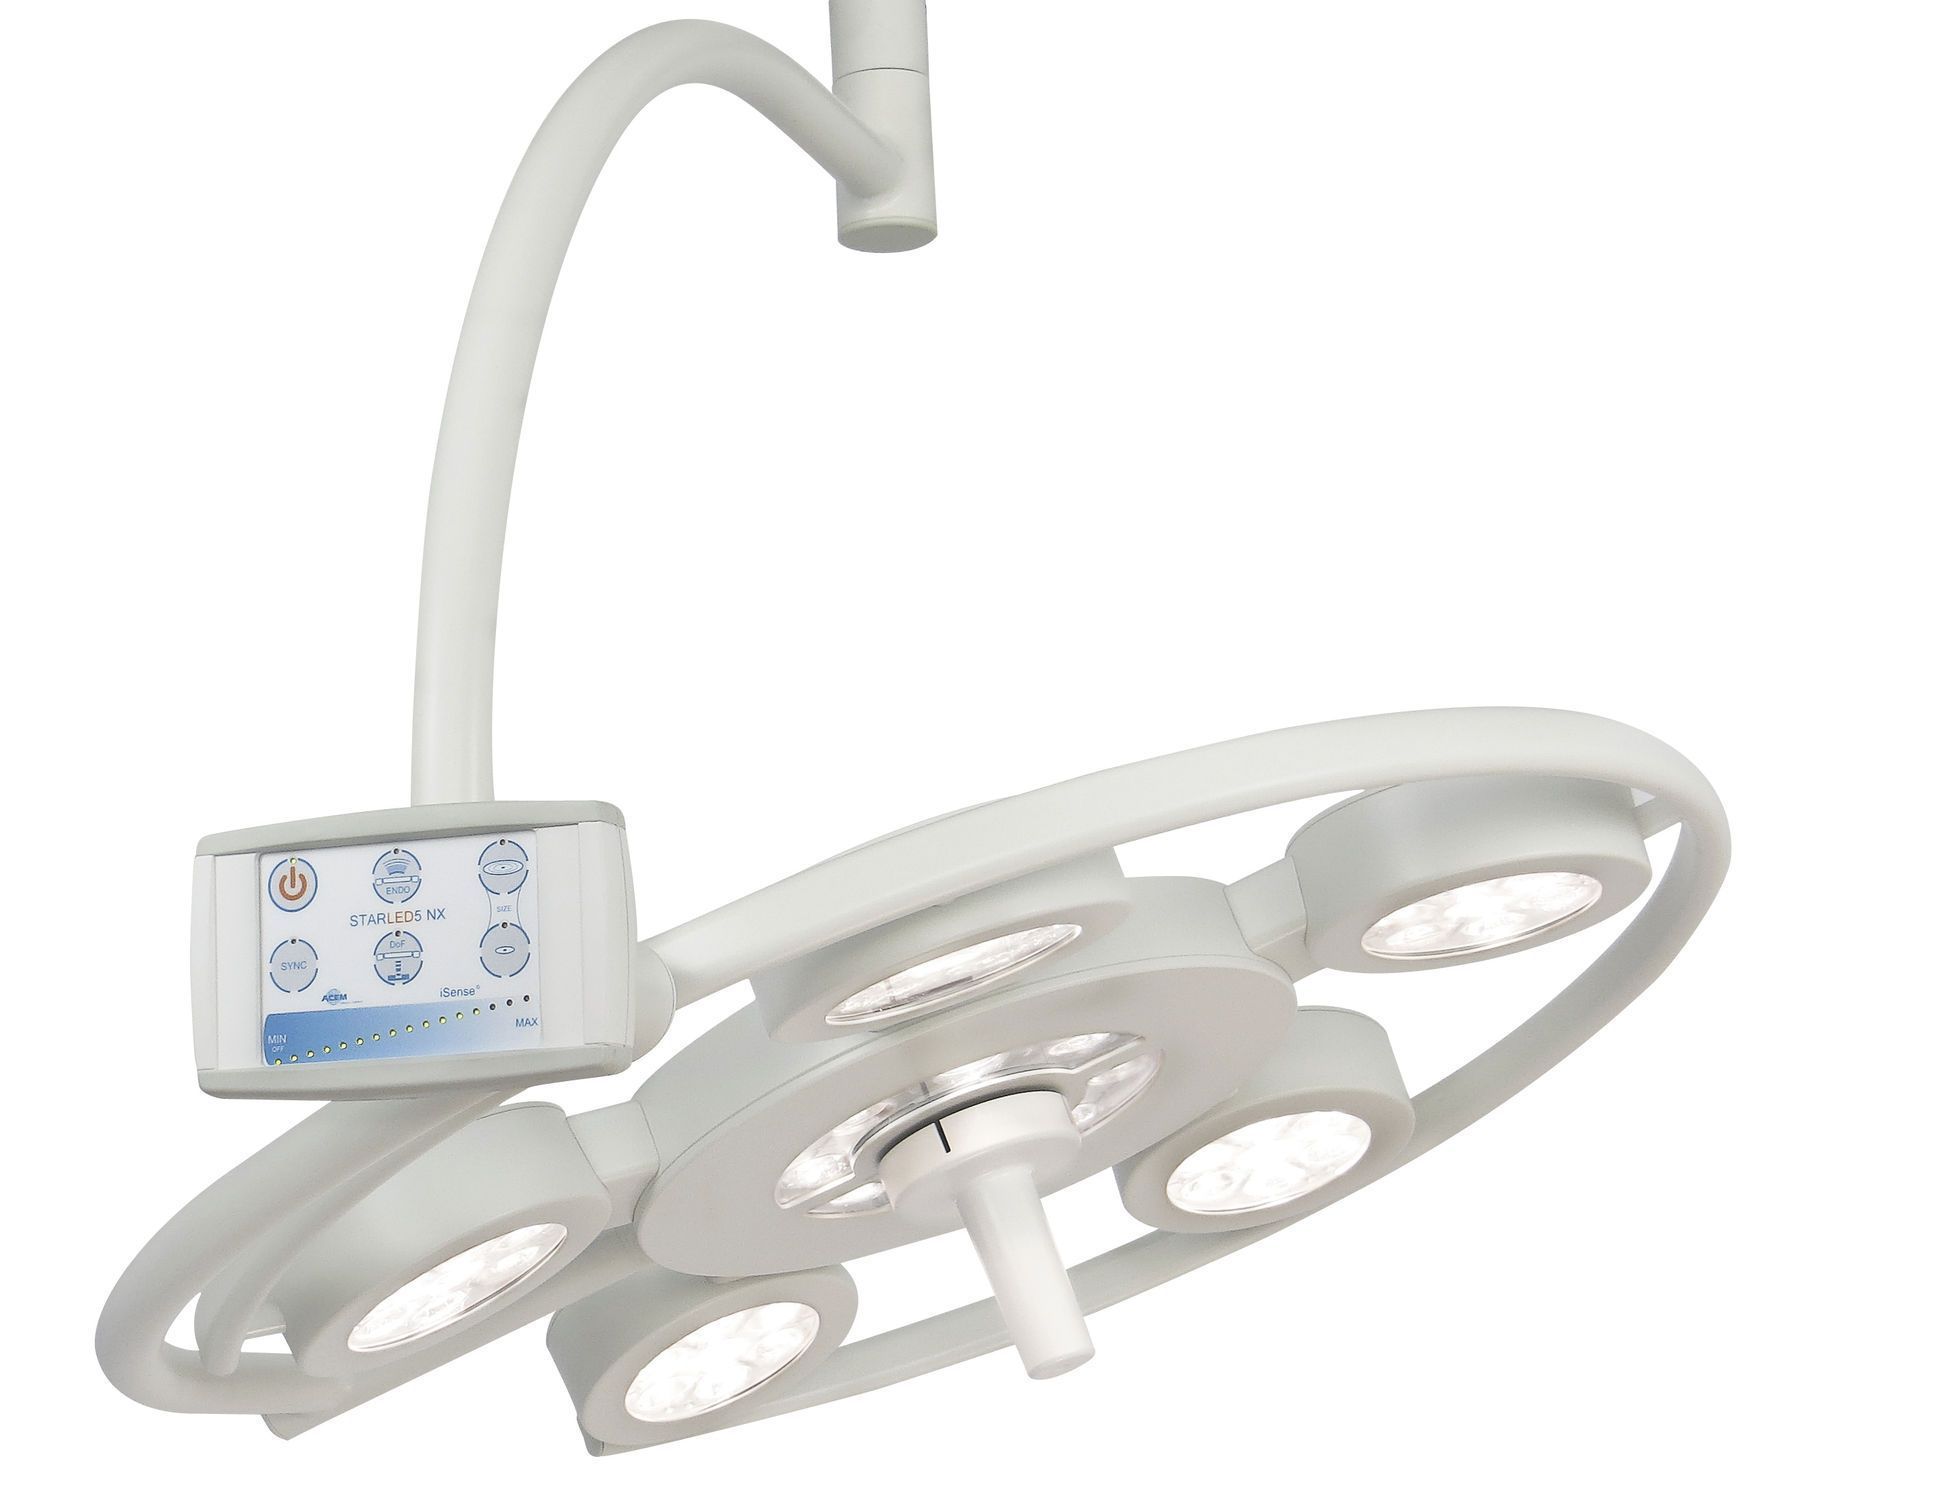 LED surgical light / ceiling-mounted / 1-arm STARLED5 NX ACEM Medical Company